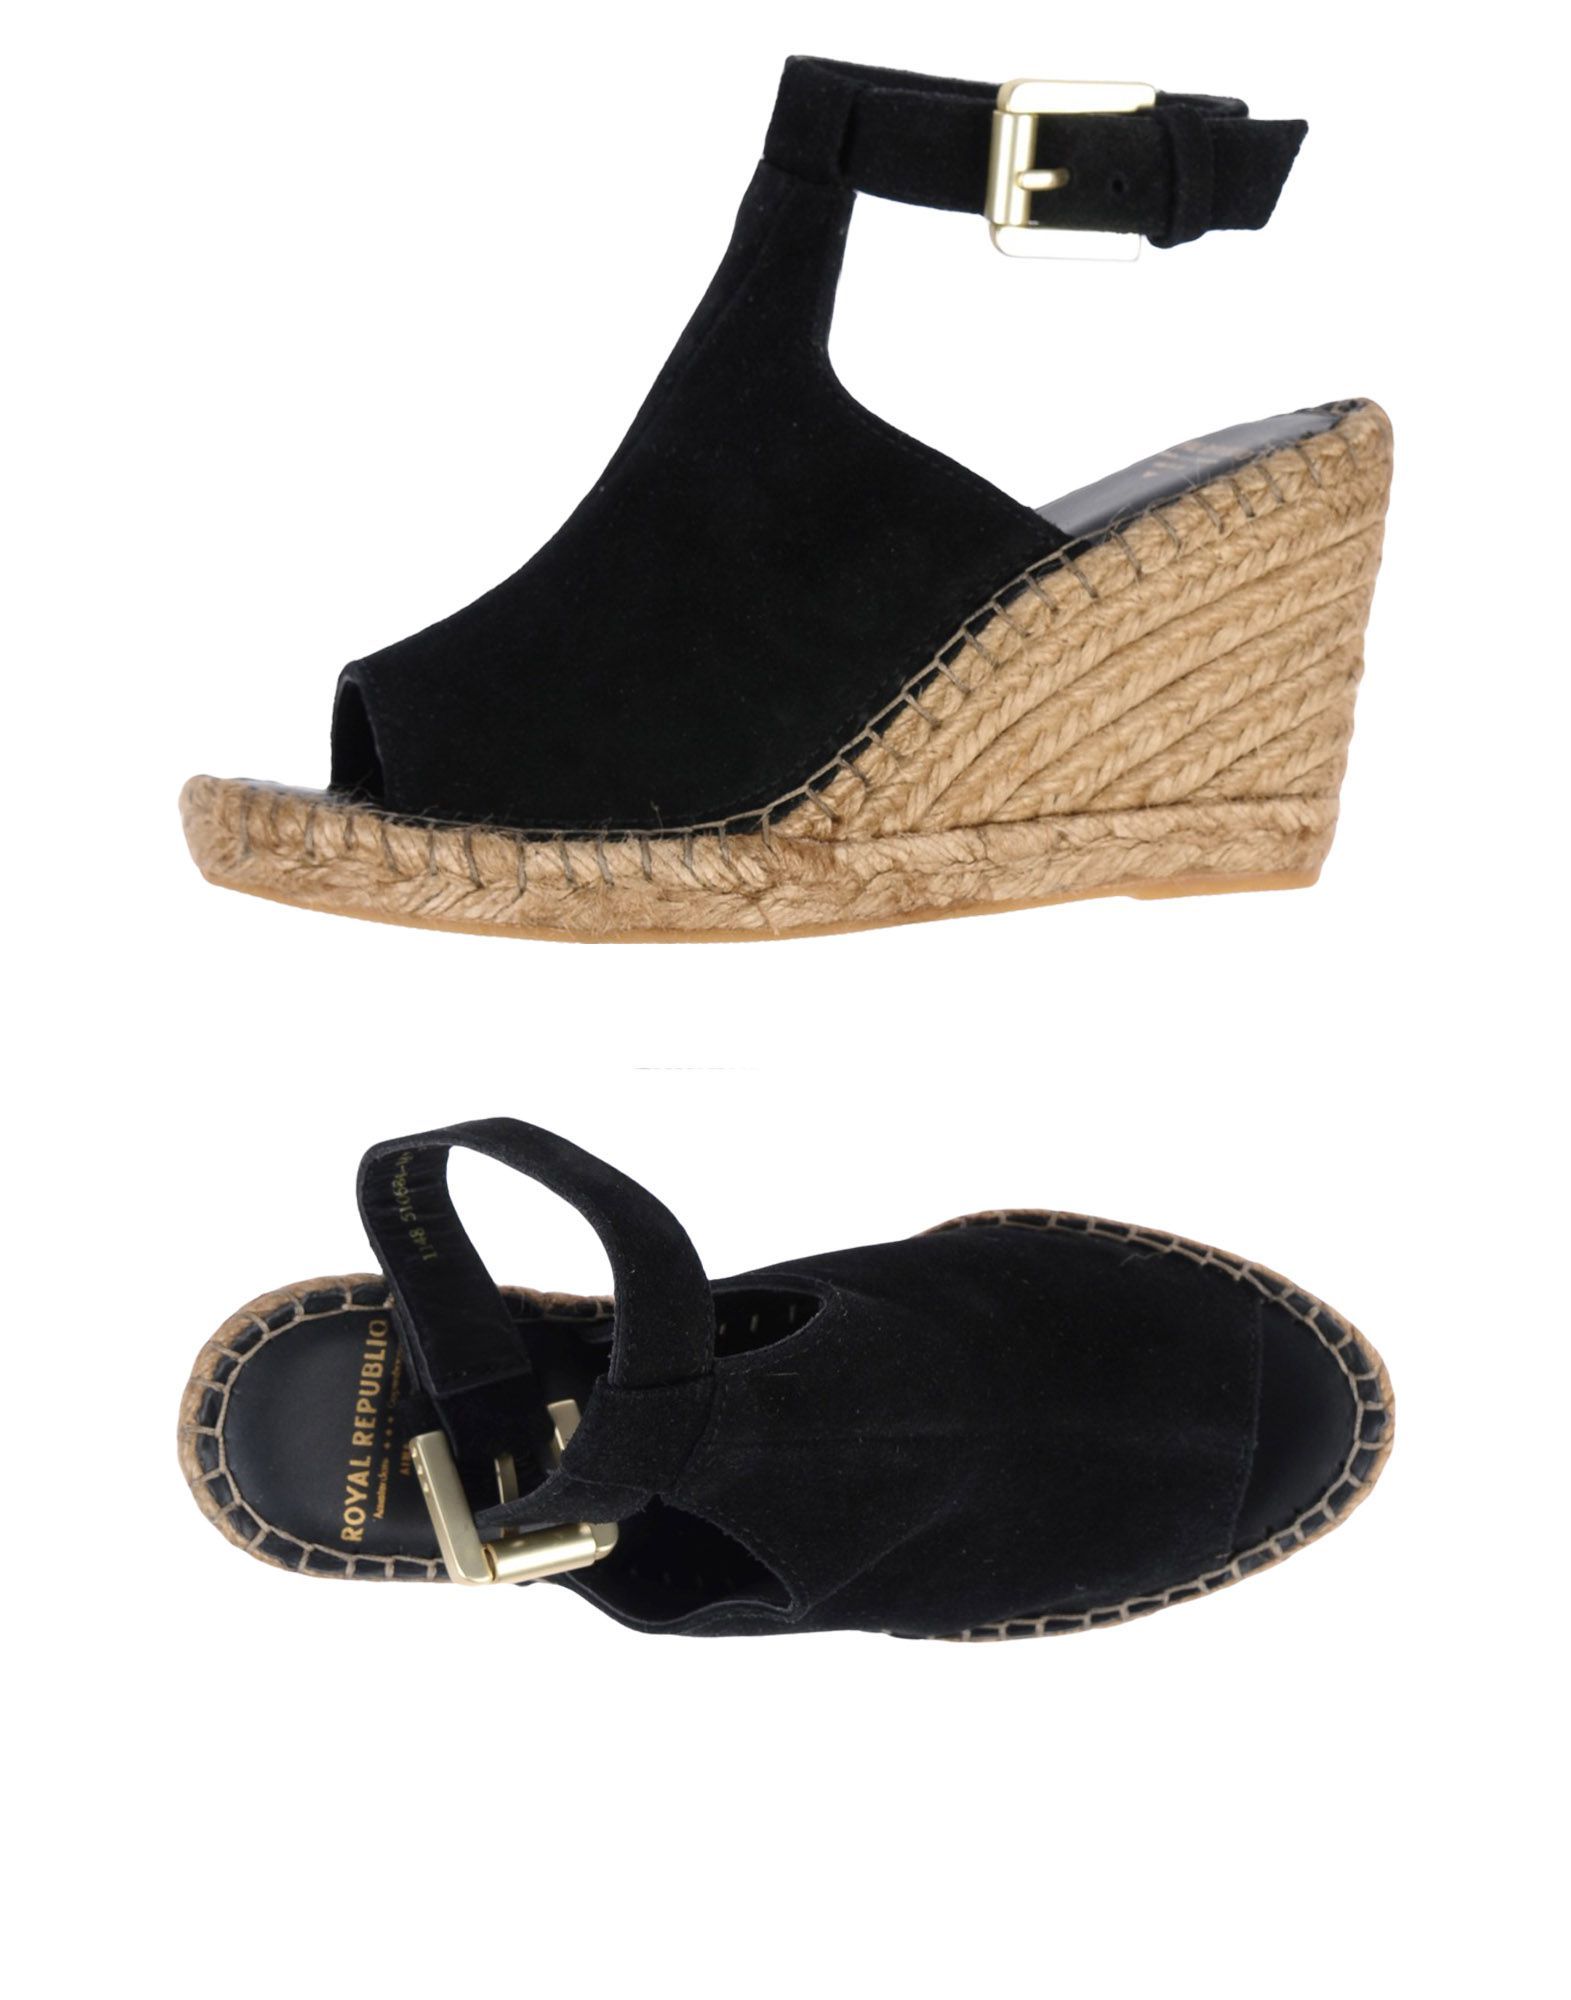 suede effect, no appliqués, solid colour, buckling ankle strap closure, round toeline, wedge heel, rope wedge, leather lining, rubber cleated sole, contains non-textile parts of animal origin, small sized